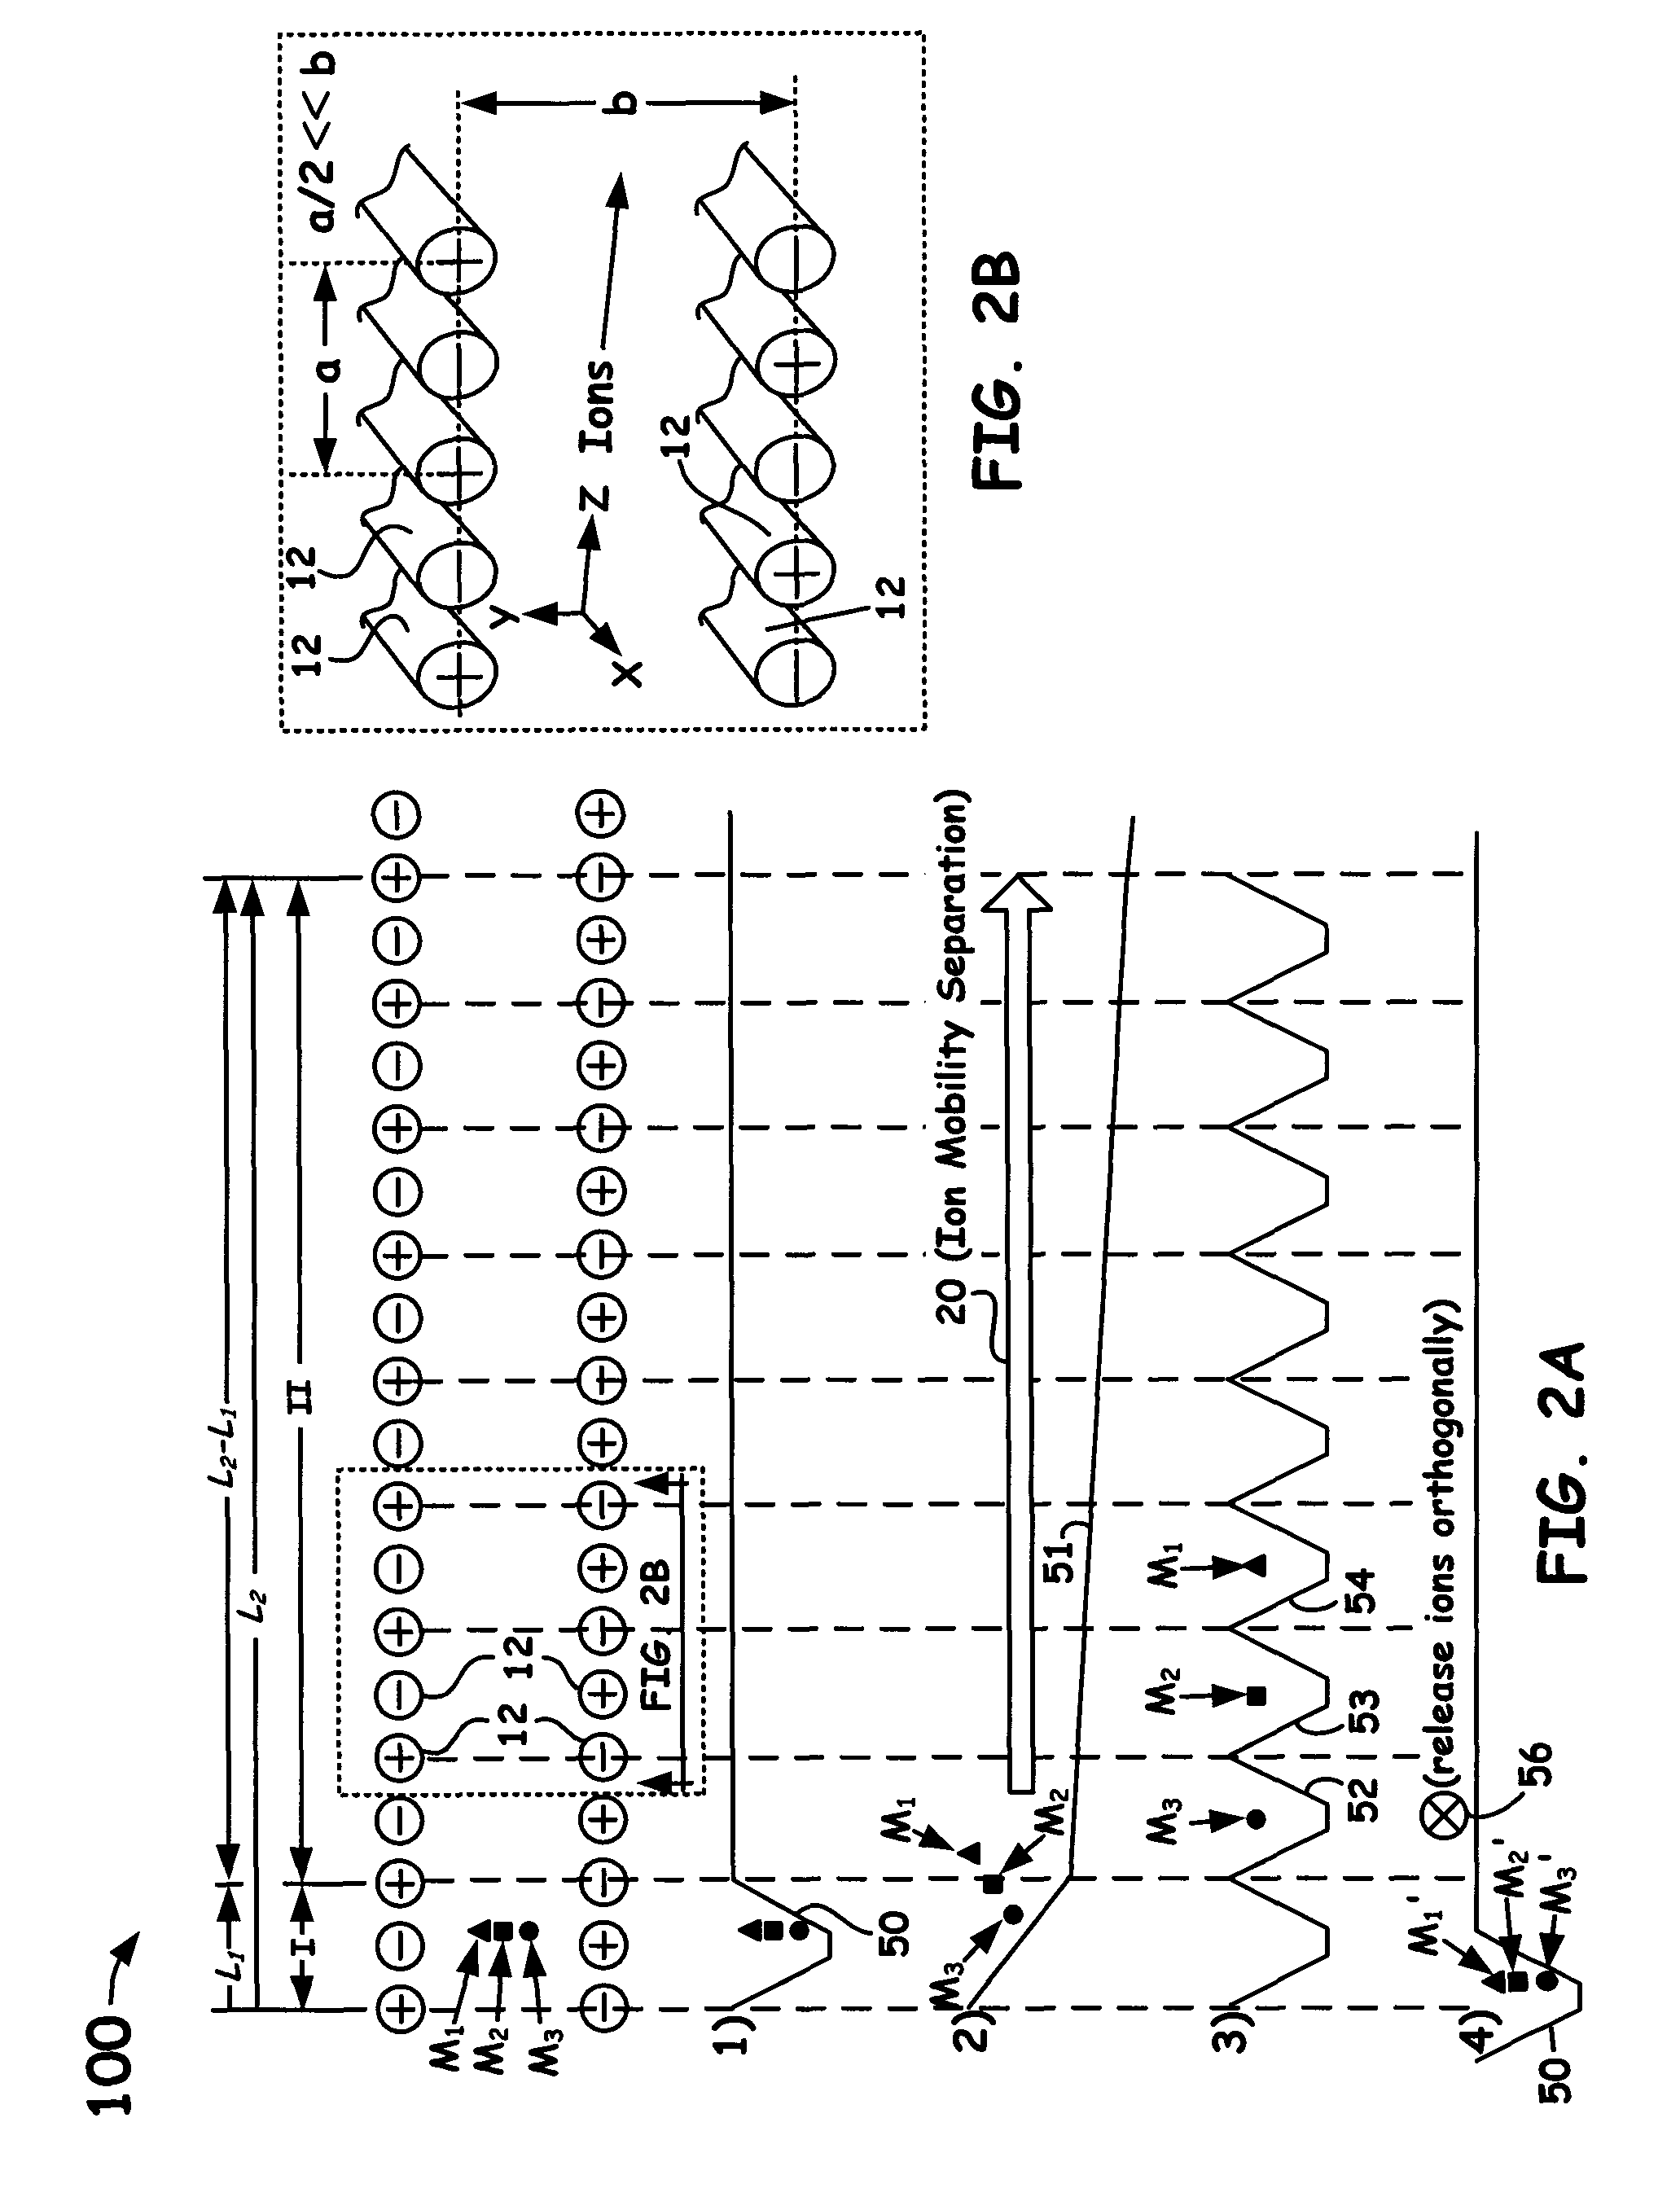 High Duty Cycle Ion Storage/Ion Mobility Separation Mass Spectrometer